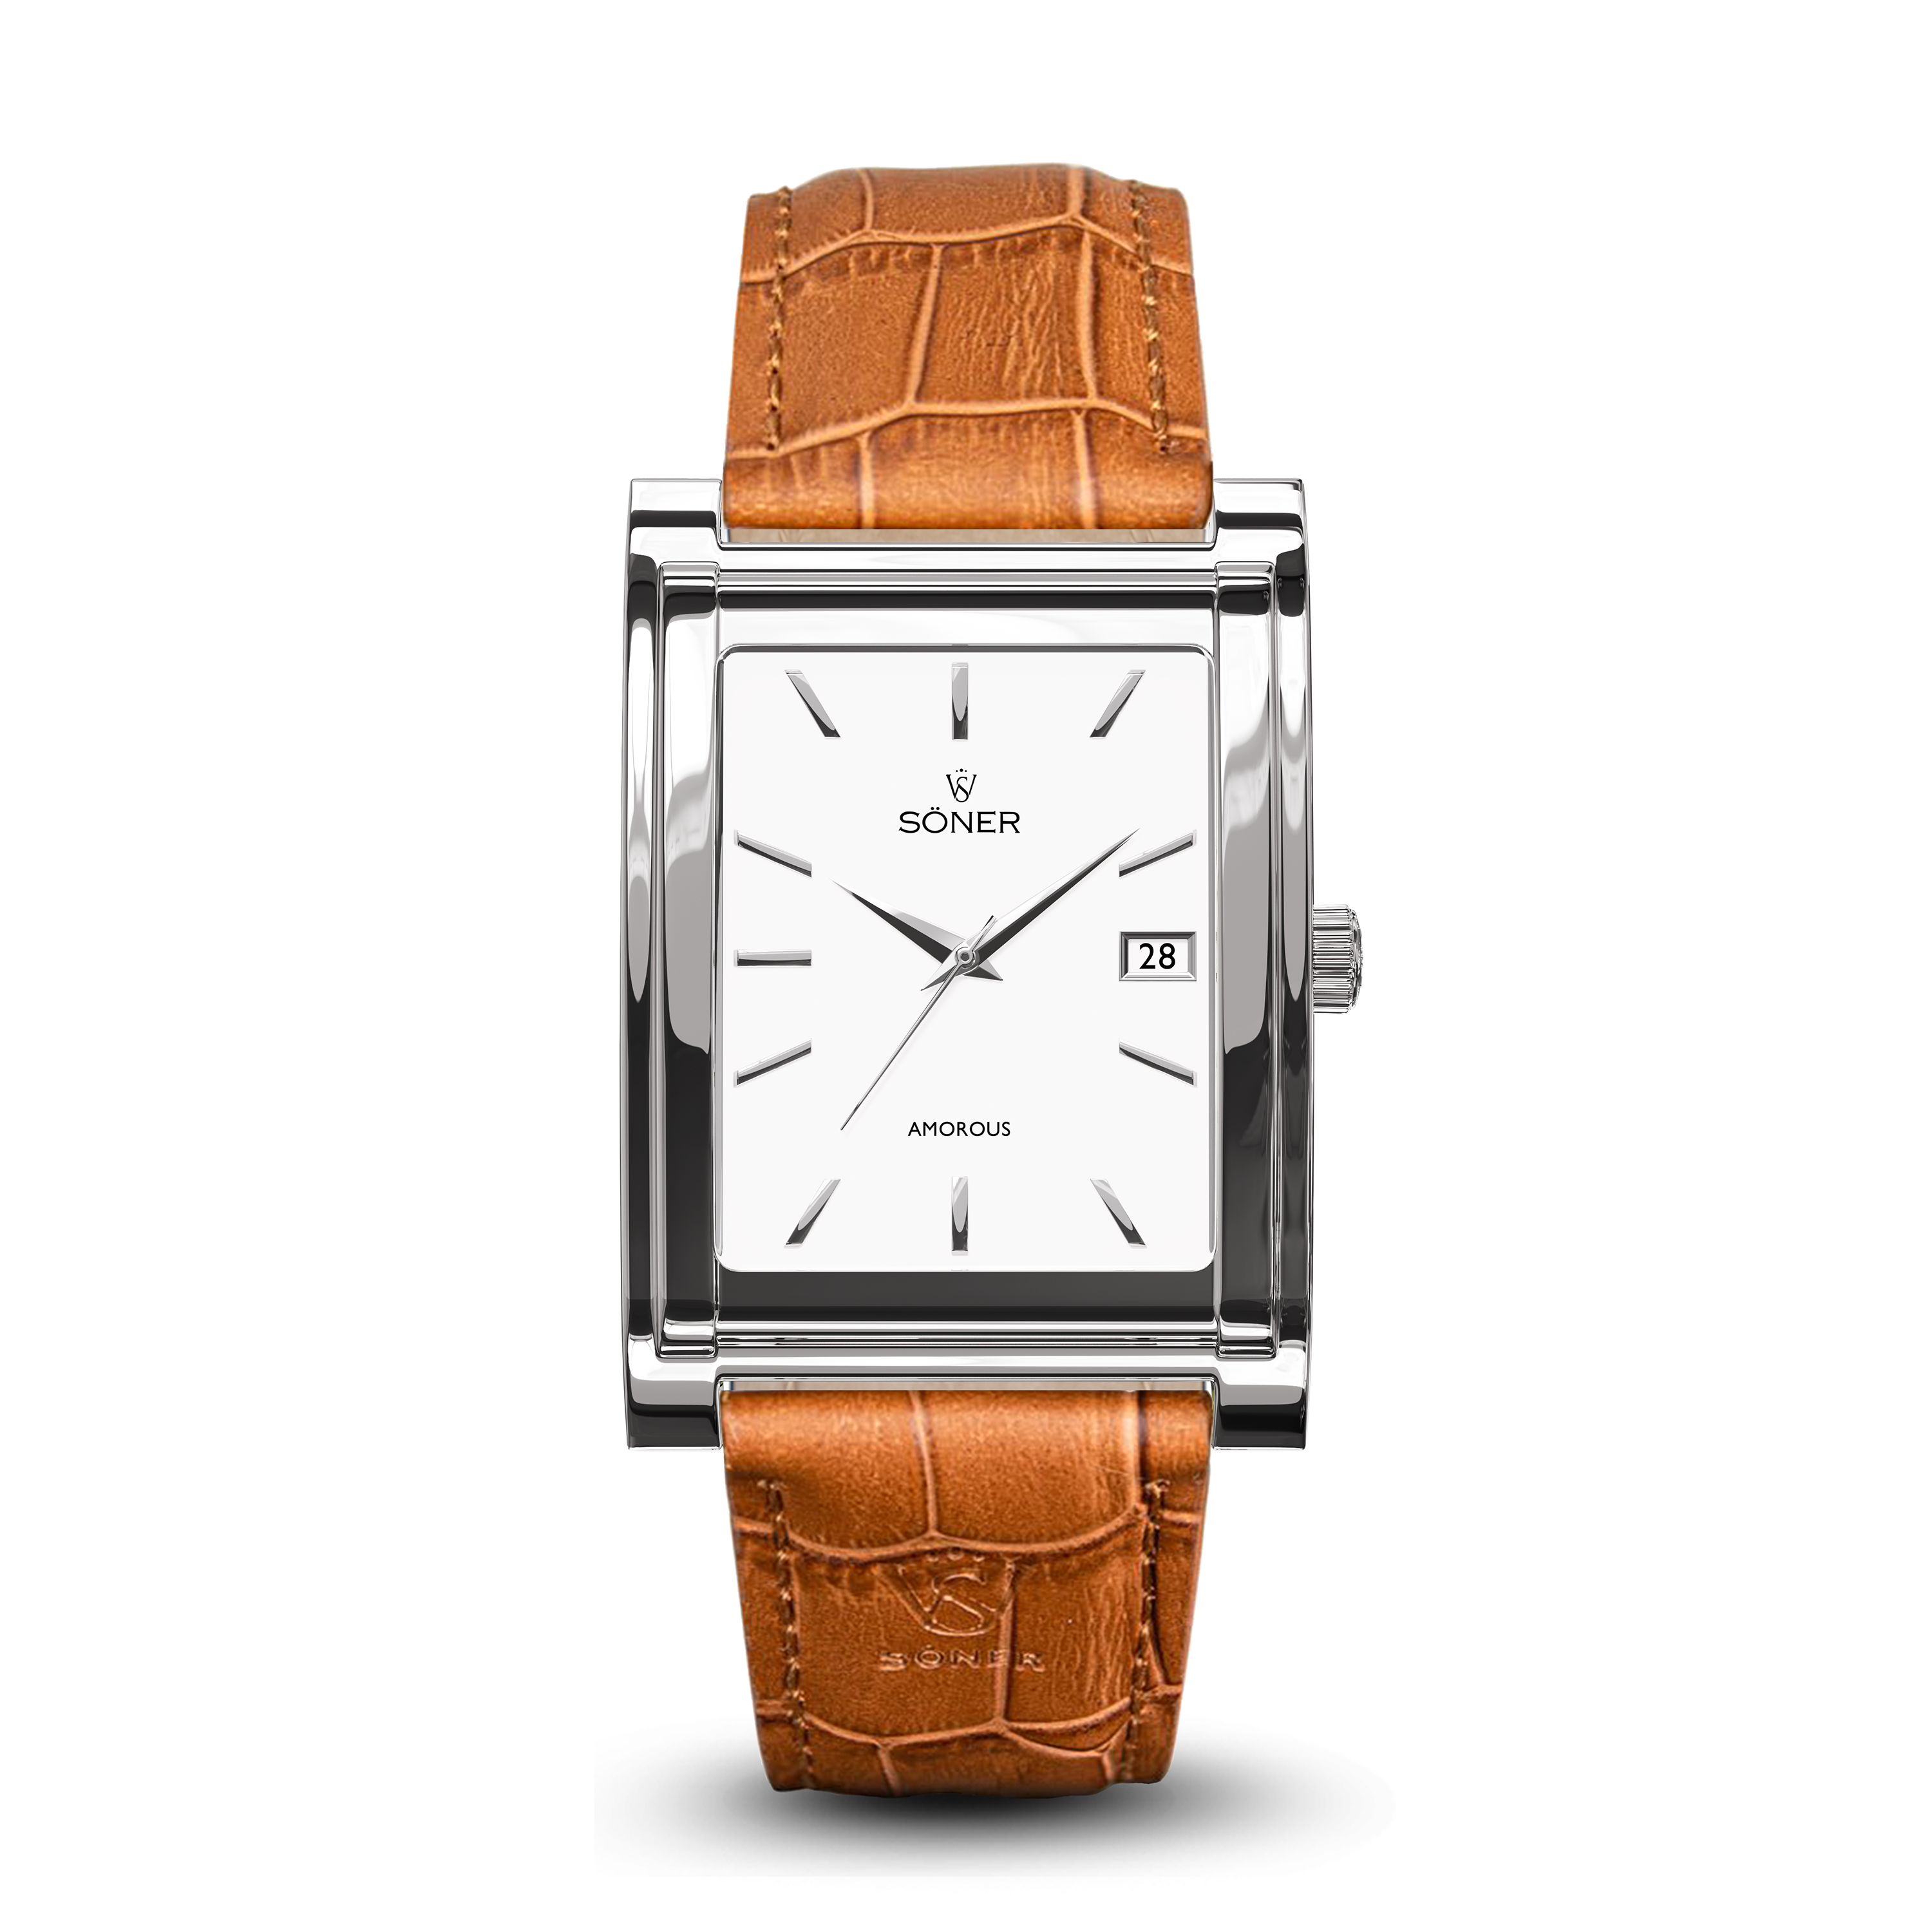 Square automatic watch, Amorous Vienna with white dial - light brown alligator pattern leather strap front view